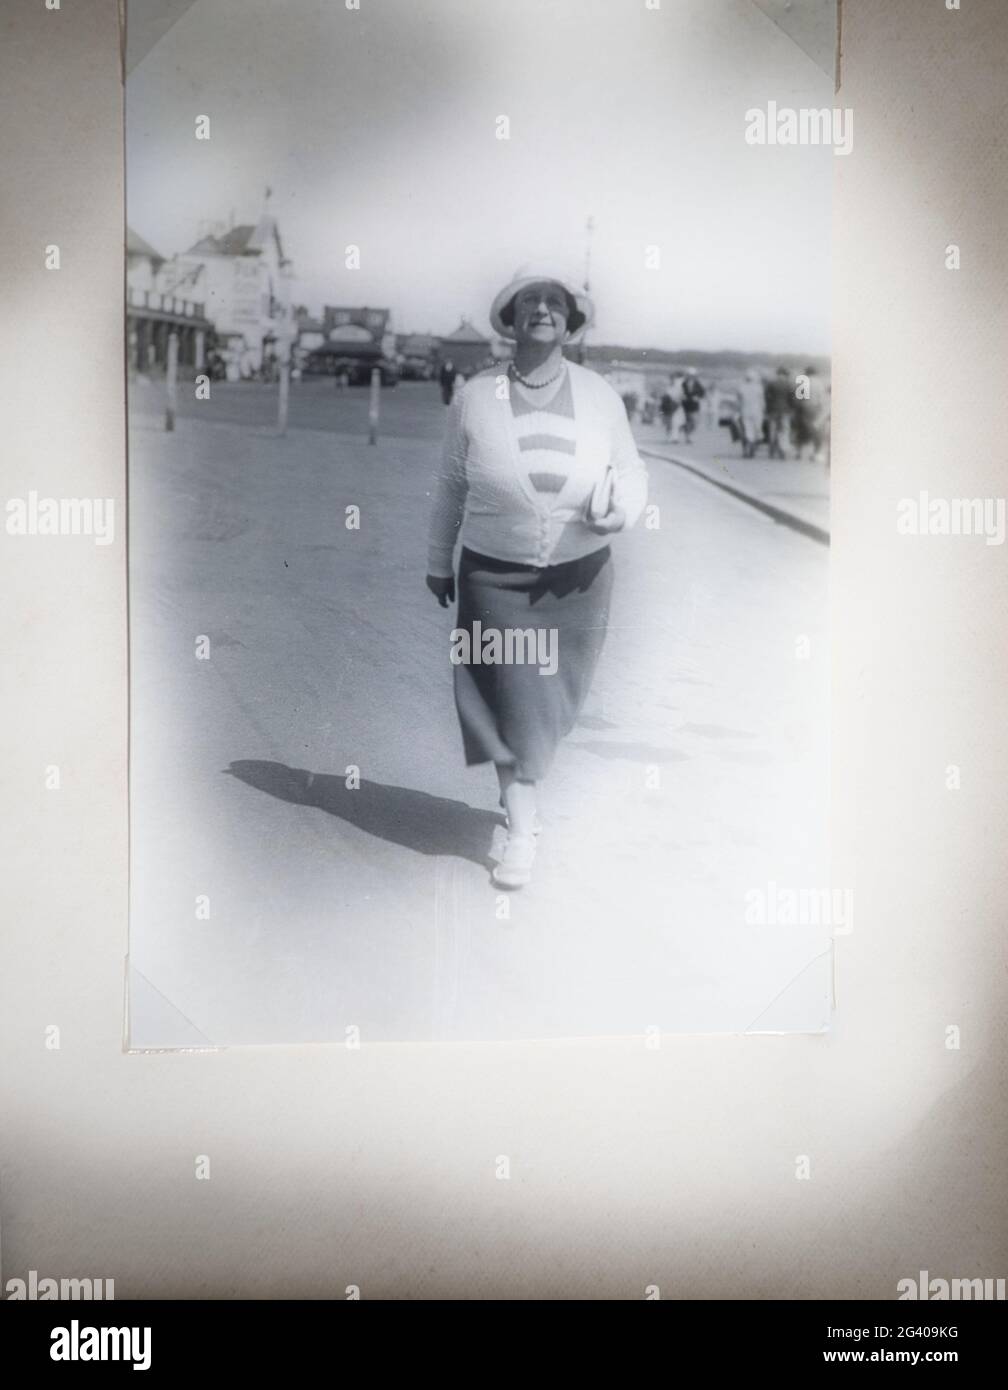 1930's authentic vintage photograph of mid adult woman in hat walking alone, Bridlington, East Yorkshire, England. Concept of nostalgia, old fashioned Stock Photo